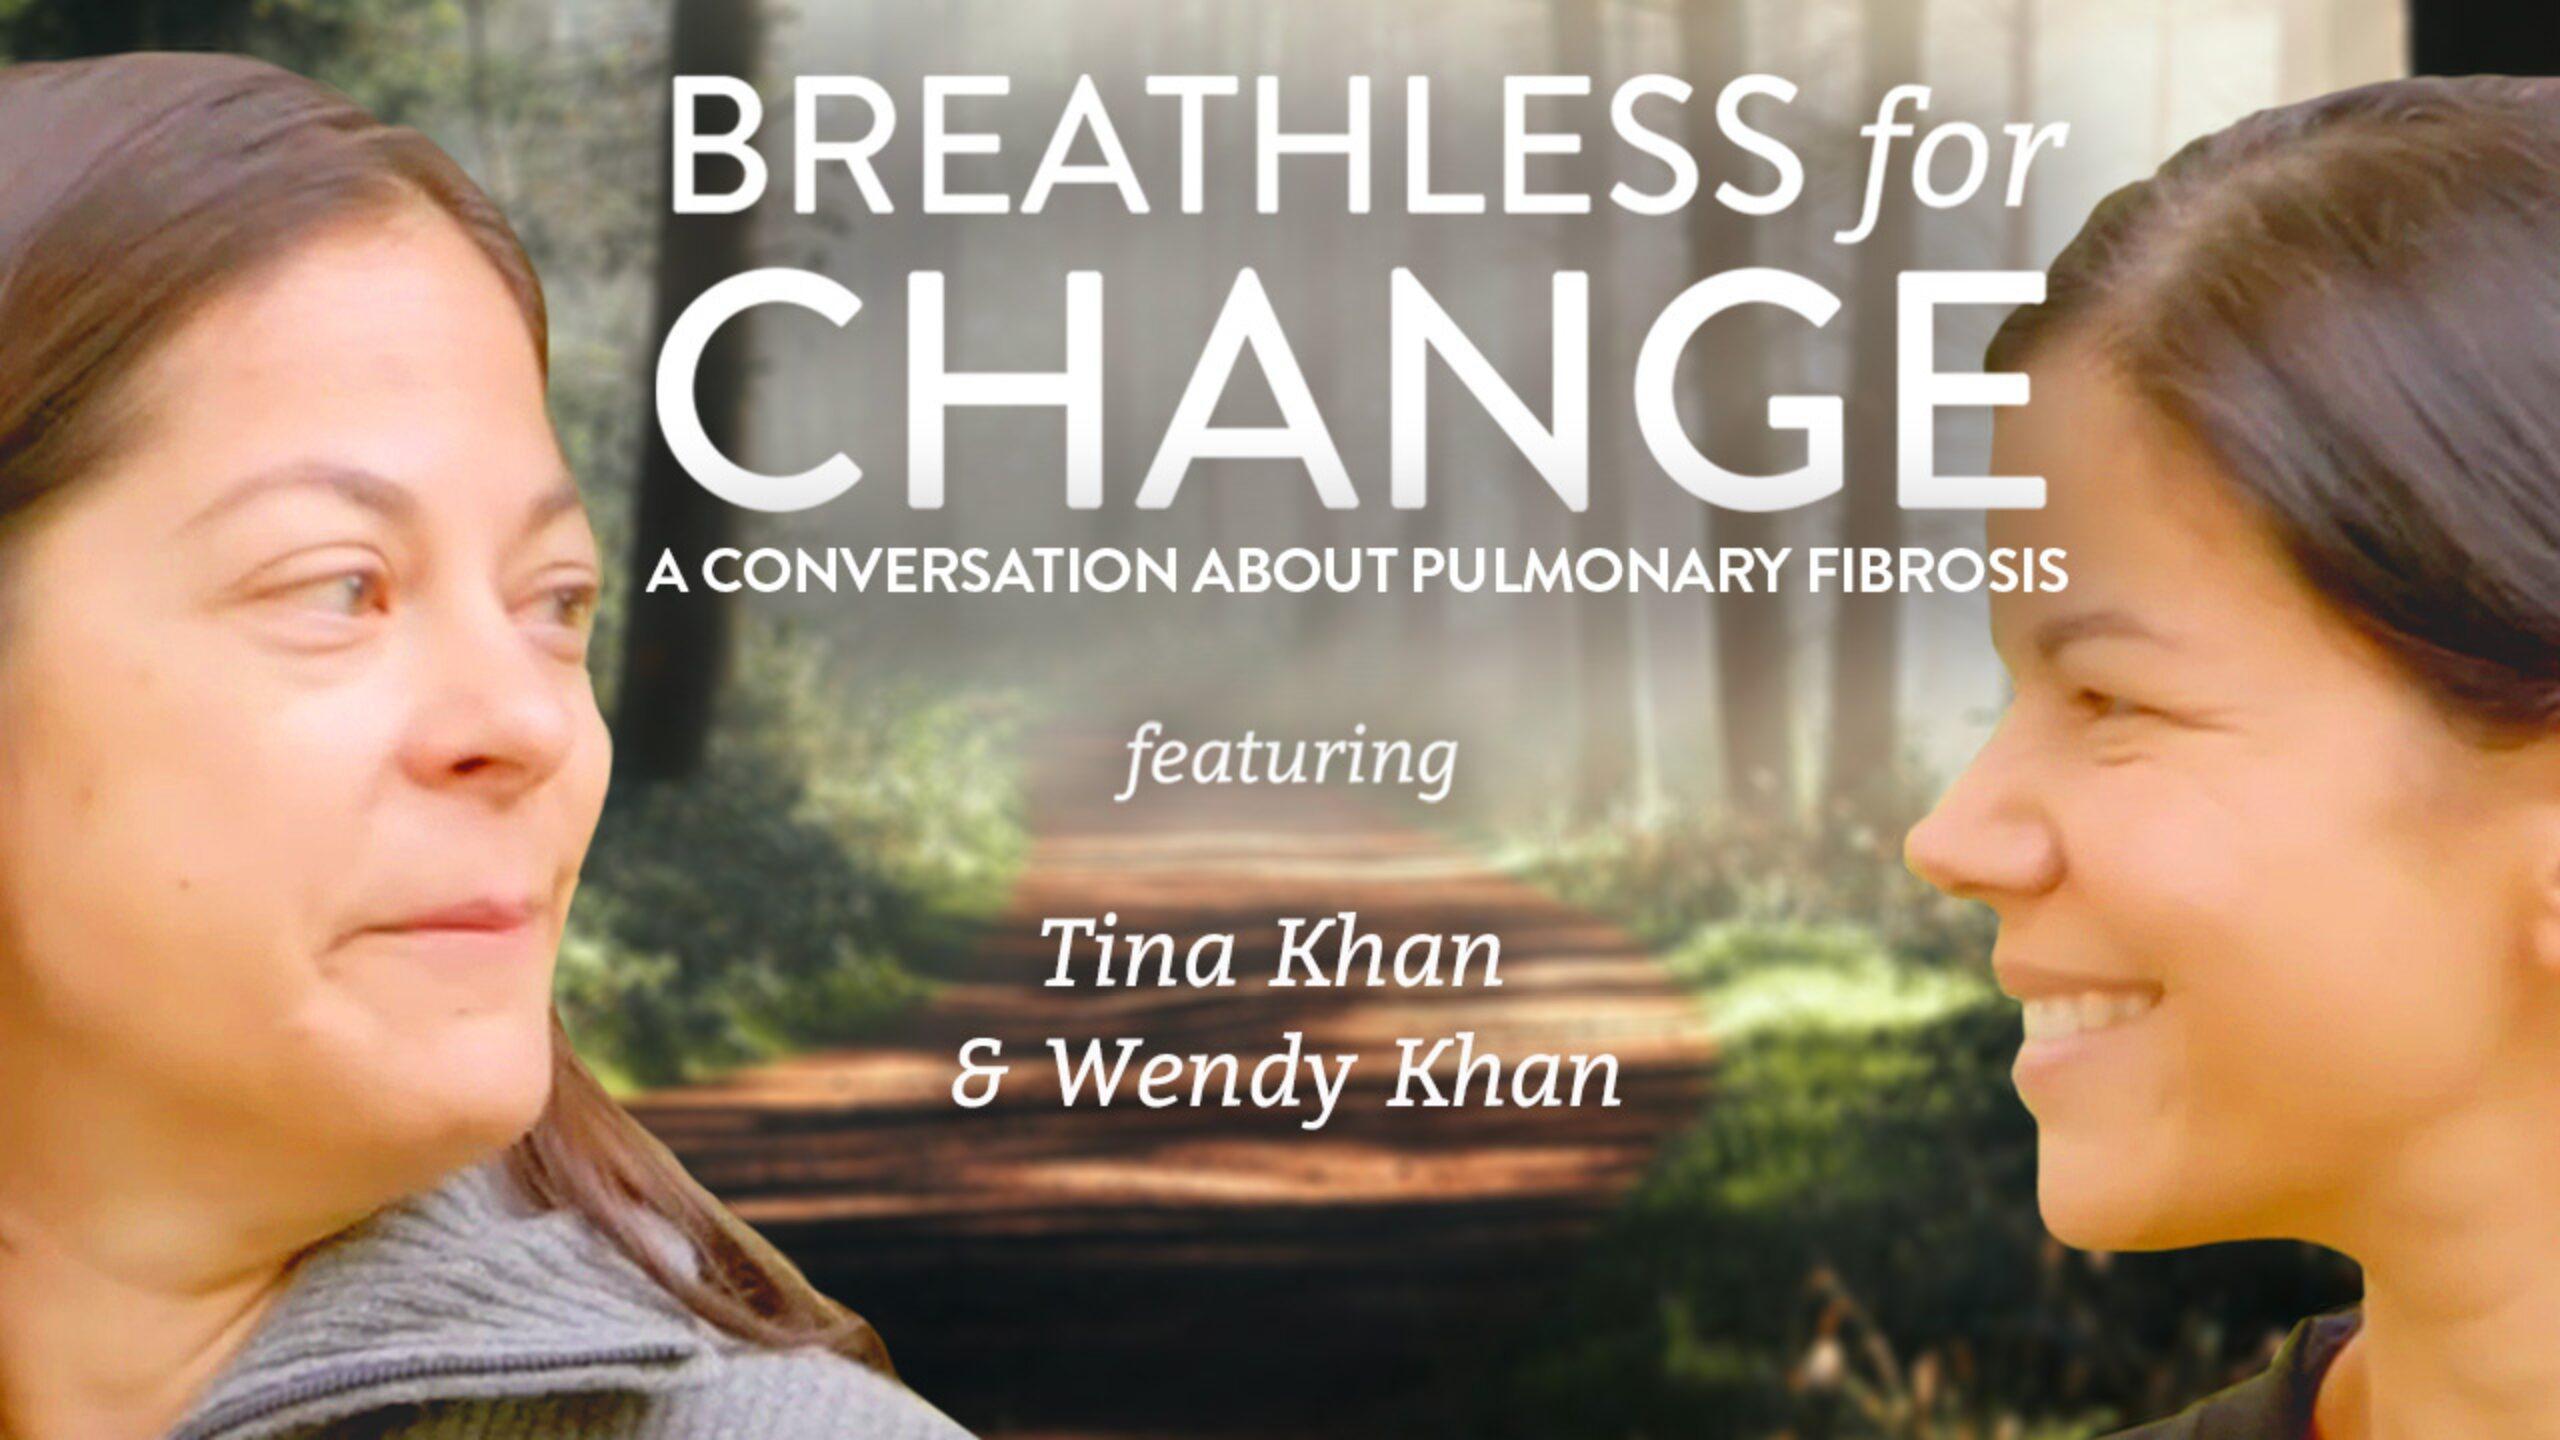 The Khan Family’s Journey with Pulmonary Fibrosis